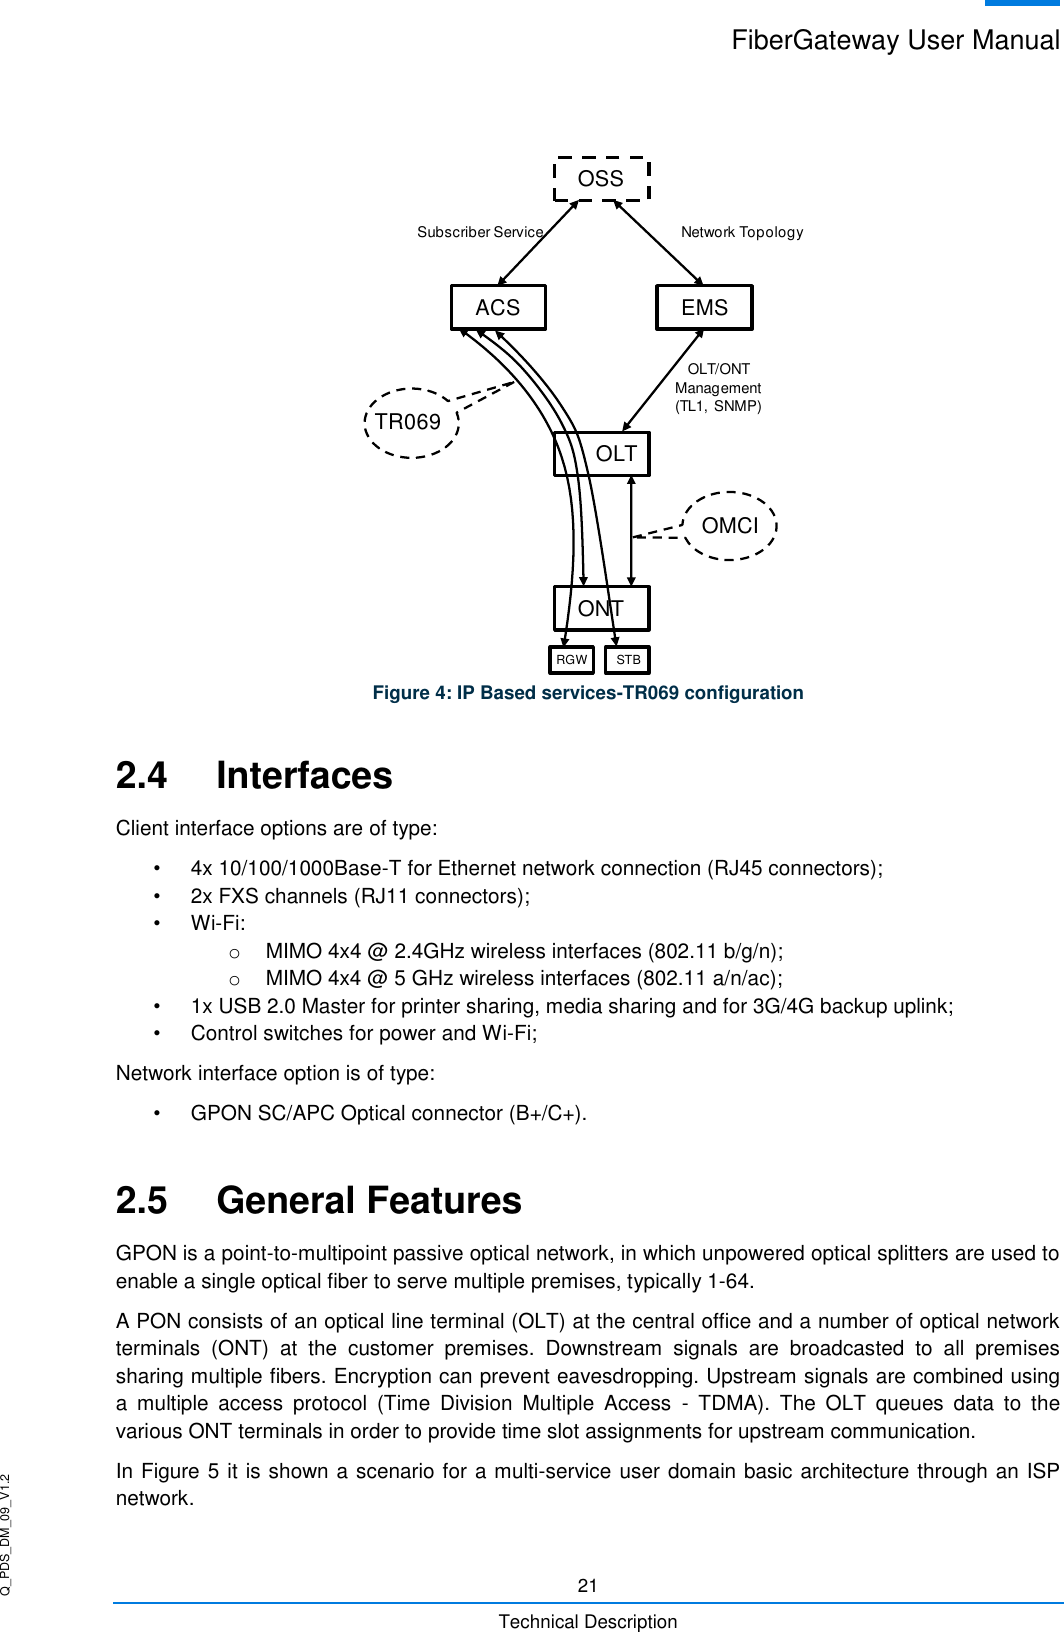 Q_PDS_DM_09_V1.2 FiberGateway User Manual  21 Technical Description   Figure 4: IP Based services-TR069 configuration 2.4  Interfaces Client interface options are of type: •  4x 10/100/1000Base-T for Ethernet network connection (RJ45 connectors); •  2x FXS channels (RJ11 connectors); • Wi-Fi: o  MIMO 4x4 @ 2.4GHz wireless interfaces (802.11 b/g/n); o  MIMO 4x4 @ 5 GHz wireless interfaces (802.11 a/n/ac); •  1x USB 2.0 Master for printer sharing, media sharing and for 3G/4G backup uplink; •  Control switches for power and Wi-Fi; Network interface option is of type: •  GPON SC/APC Optical connector (B+/C+). 2.5  General Features GPON is a point-to-multipoint passive optical network, in which unpowered optical splitters are used to enable a single optical fiber to serve multiple premises, typically 1-64. A PON consists of an optical line terminal (OLT) at the central office and a number of optical network terminals  (ONT)  at  the  customer  premises.  Downstream  signals  are  broadcasted  to  all  premises sharing multiple fibers. Encryption can prevent eavesdropping. Upstream signals are combined using a  multiple  access  protocol  (Time  Division  Multiple  Access  -  TDMA).  The  OLT  queues  data  to  the various ONT terminals in order to provide time slot assignments for upstream communication. In Figure 5 it is shown a scenario for a multi-service user domain basic architecture through an ISP network. OSSEMSOLTONTRGW STBACSTR069OMCINetwork TopologySubscriber ServiceOLT/ONTManagement(TL1, SNMP)